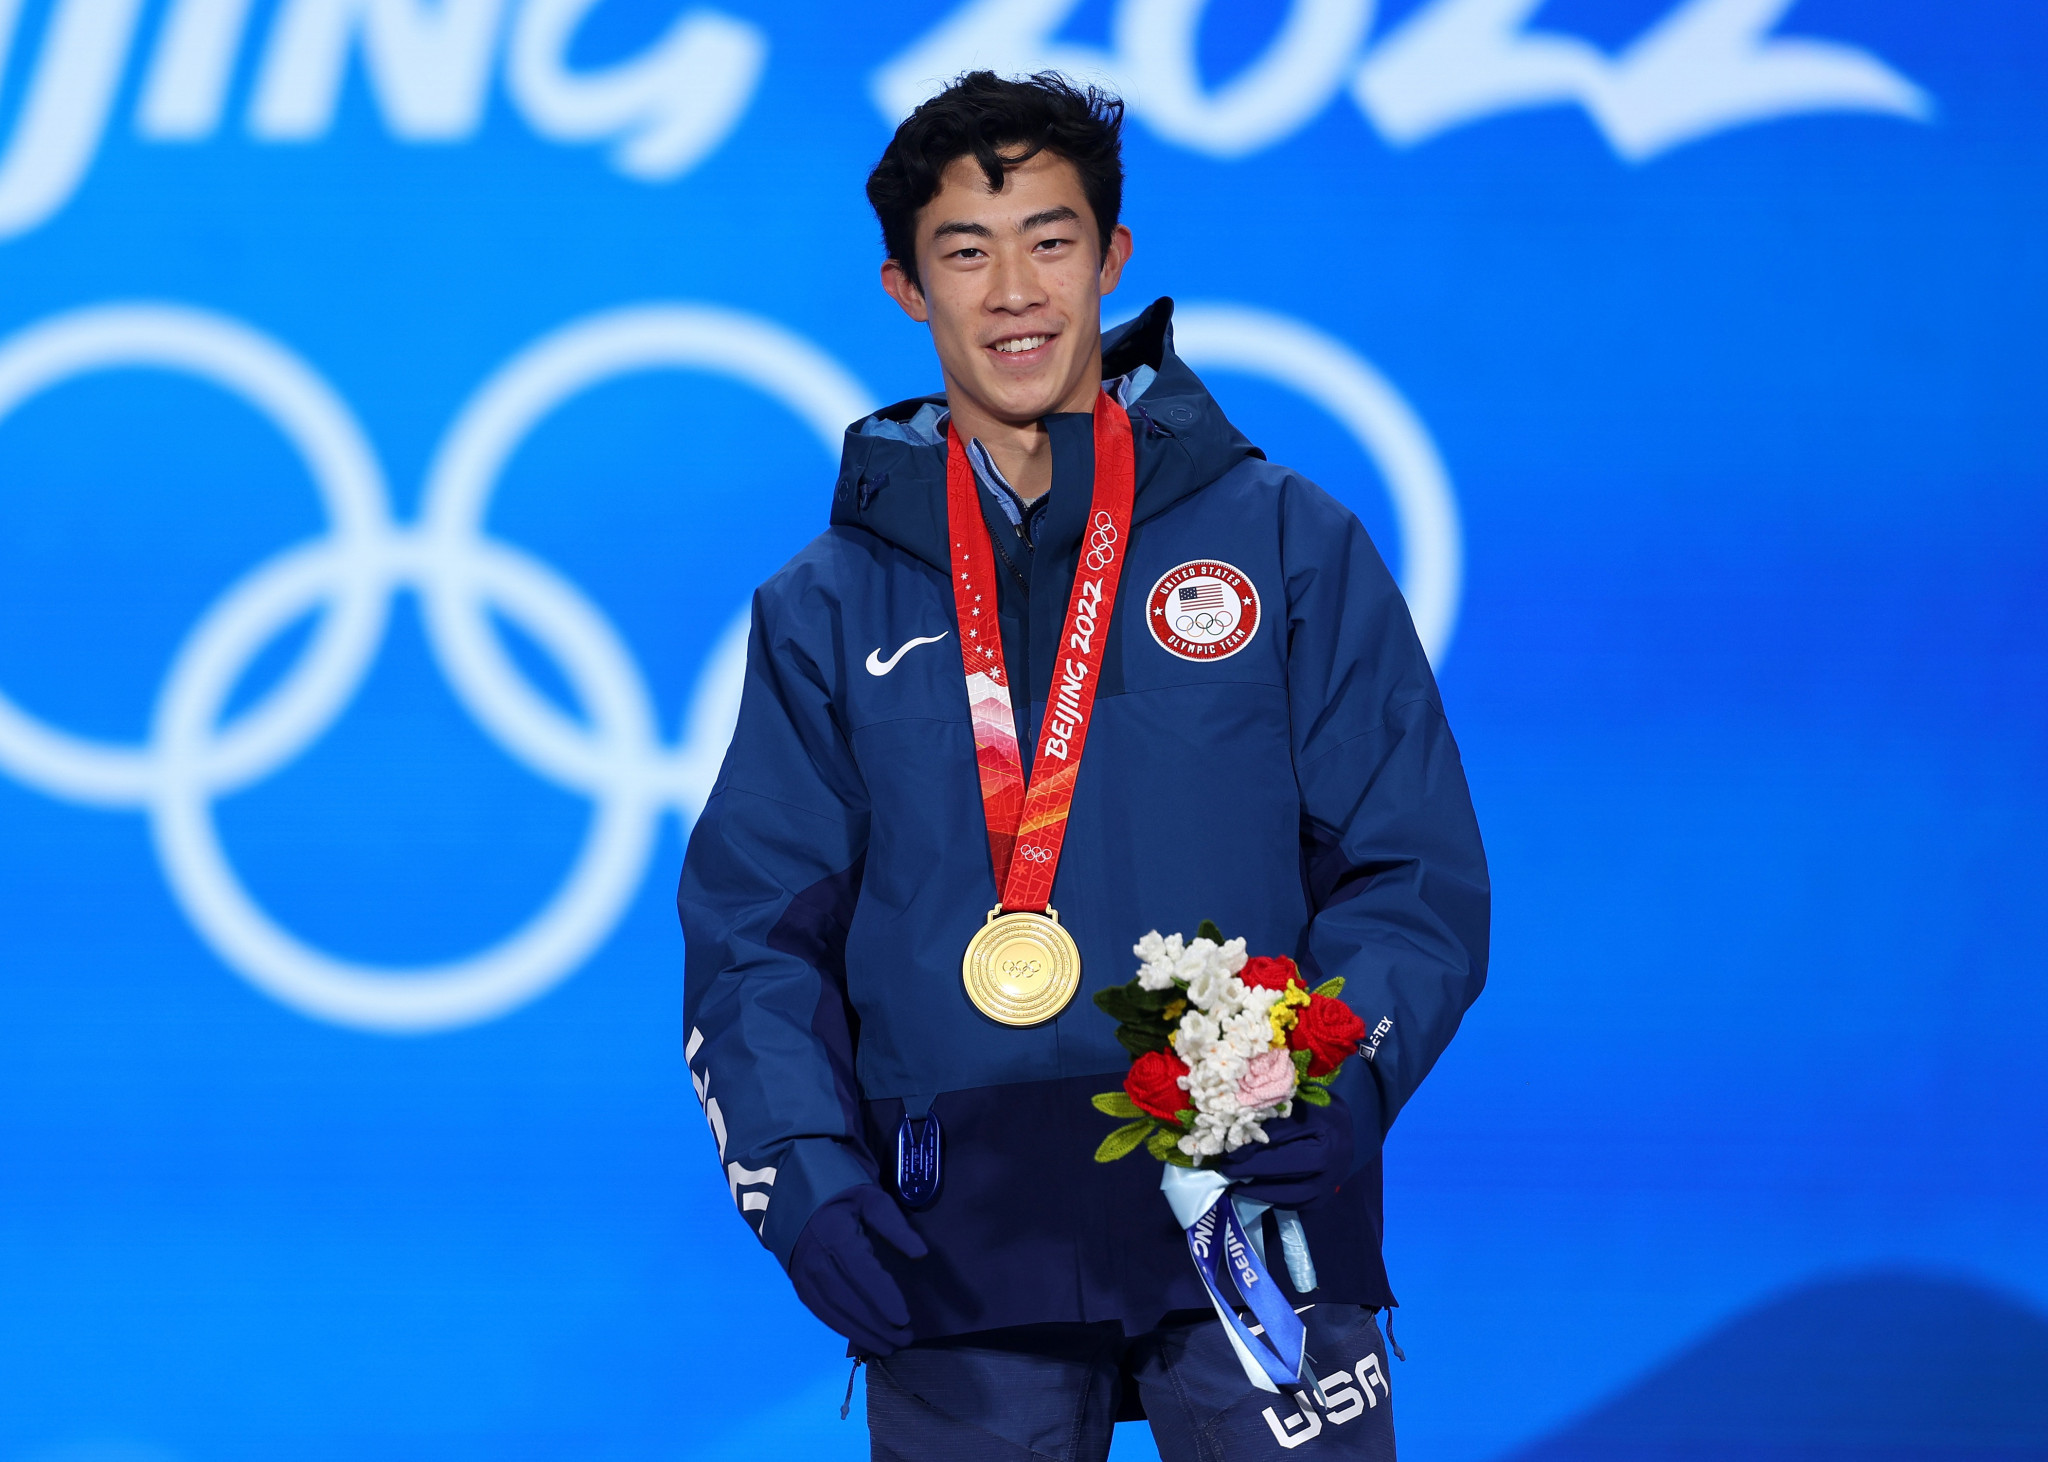 Nathan Chen, who claimed the men's singles title at Beijing 2022, could pick up a second gold medal should Valieva be found guilty ©Getty Images